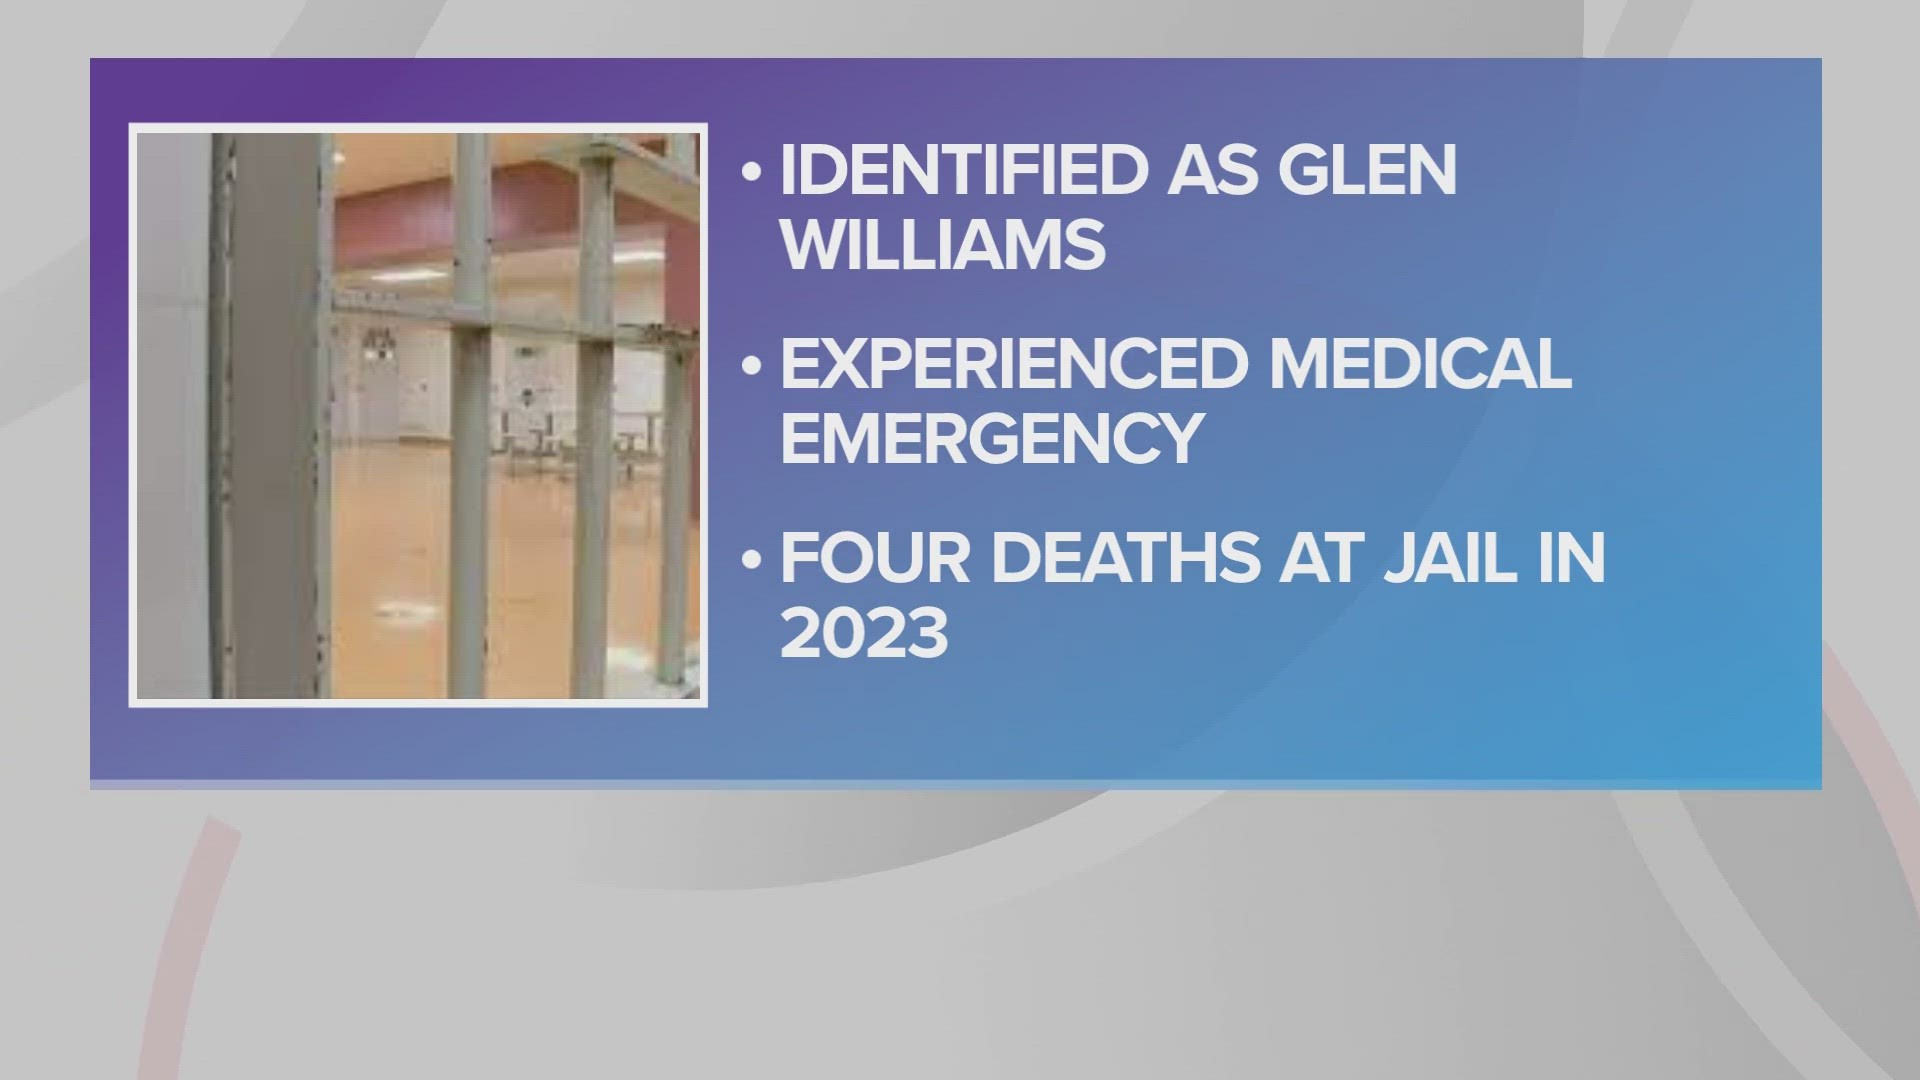 The inmate has been identified as 39-year-old Glen Williams. The incident is under investigation by the Cuyahoga County Sheriff's Department.